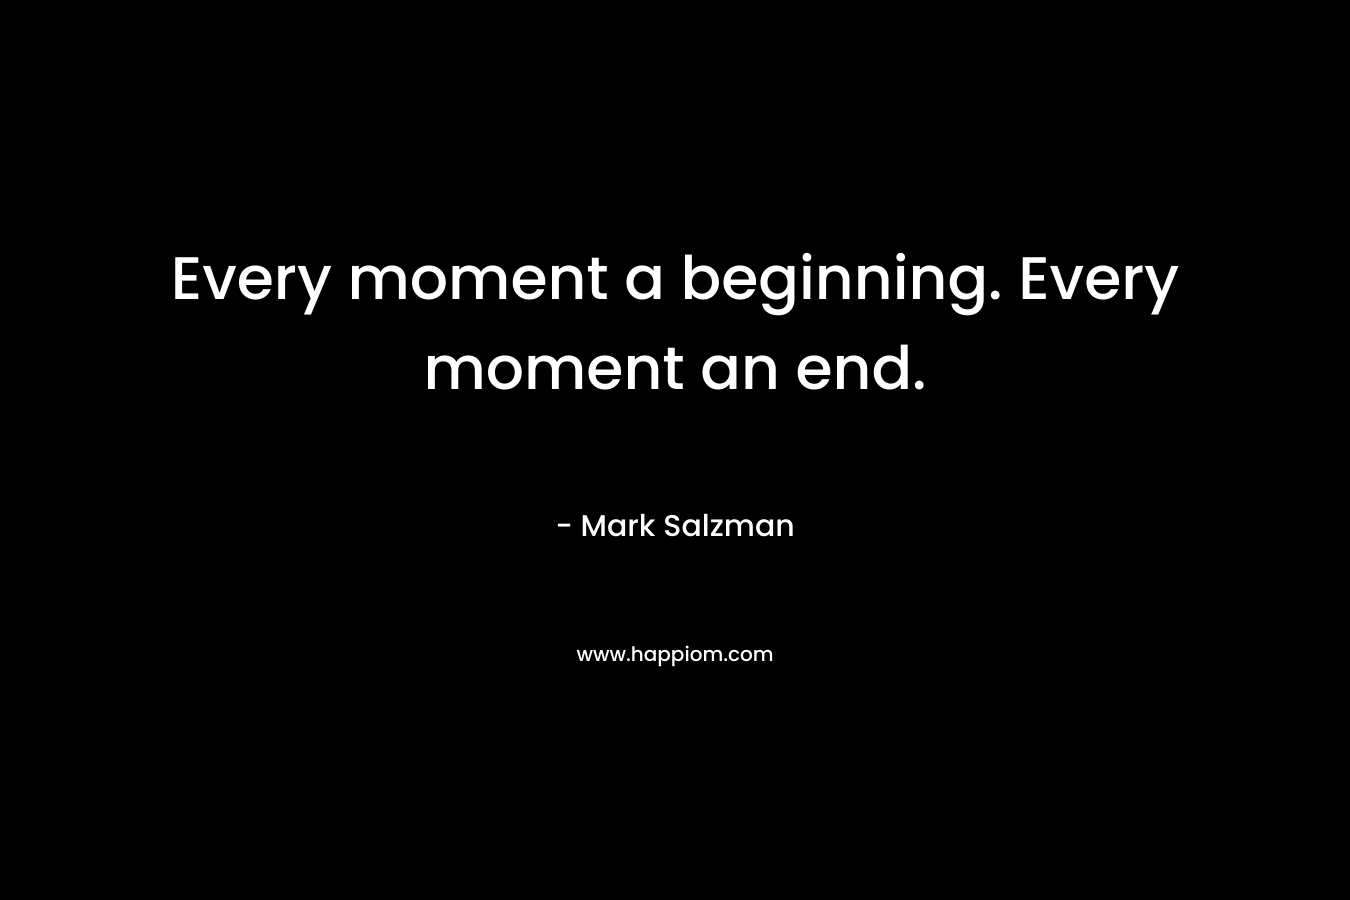 Every moment a beginning. Every moment an end.